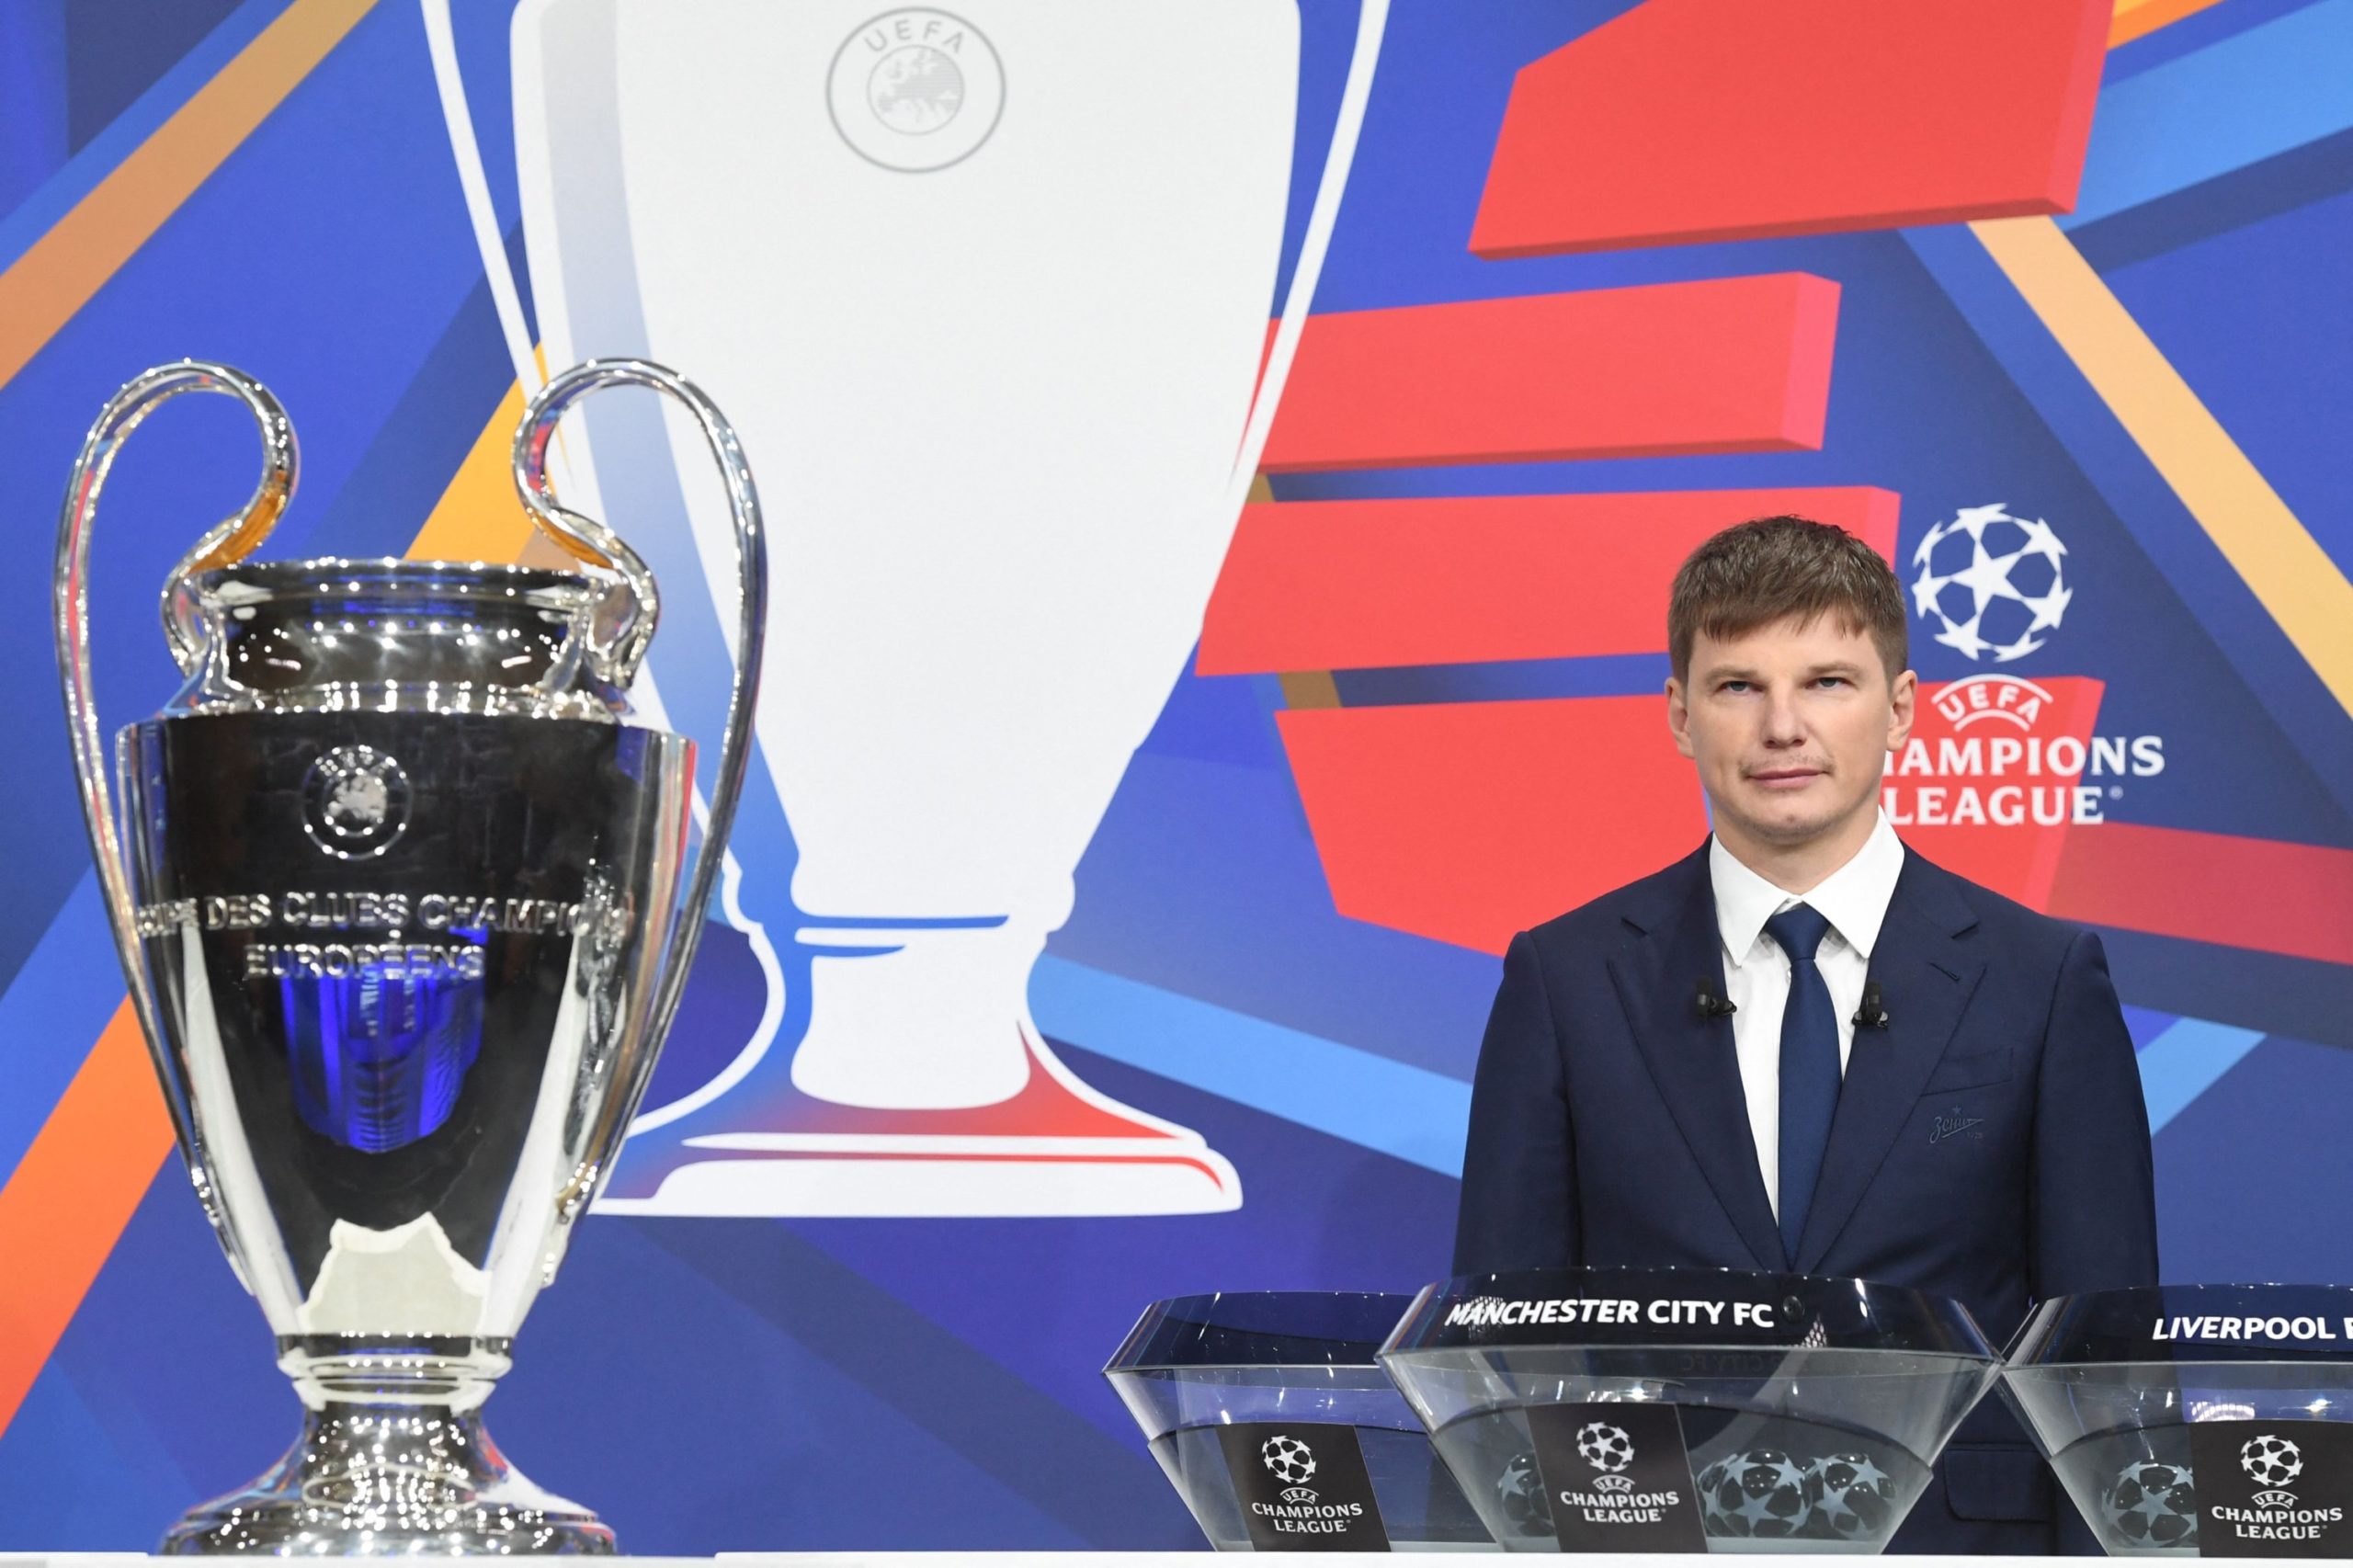 UEFA Confirms Champions League Draw Will Be Re-done